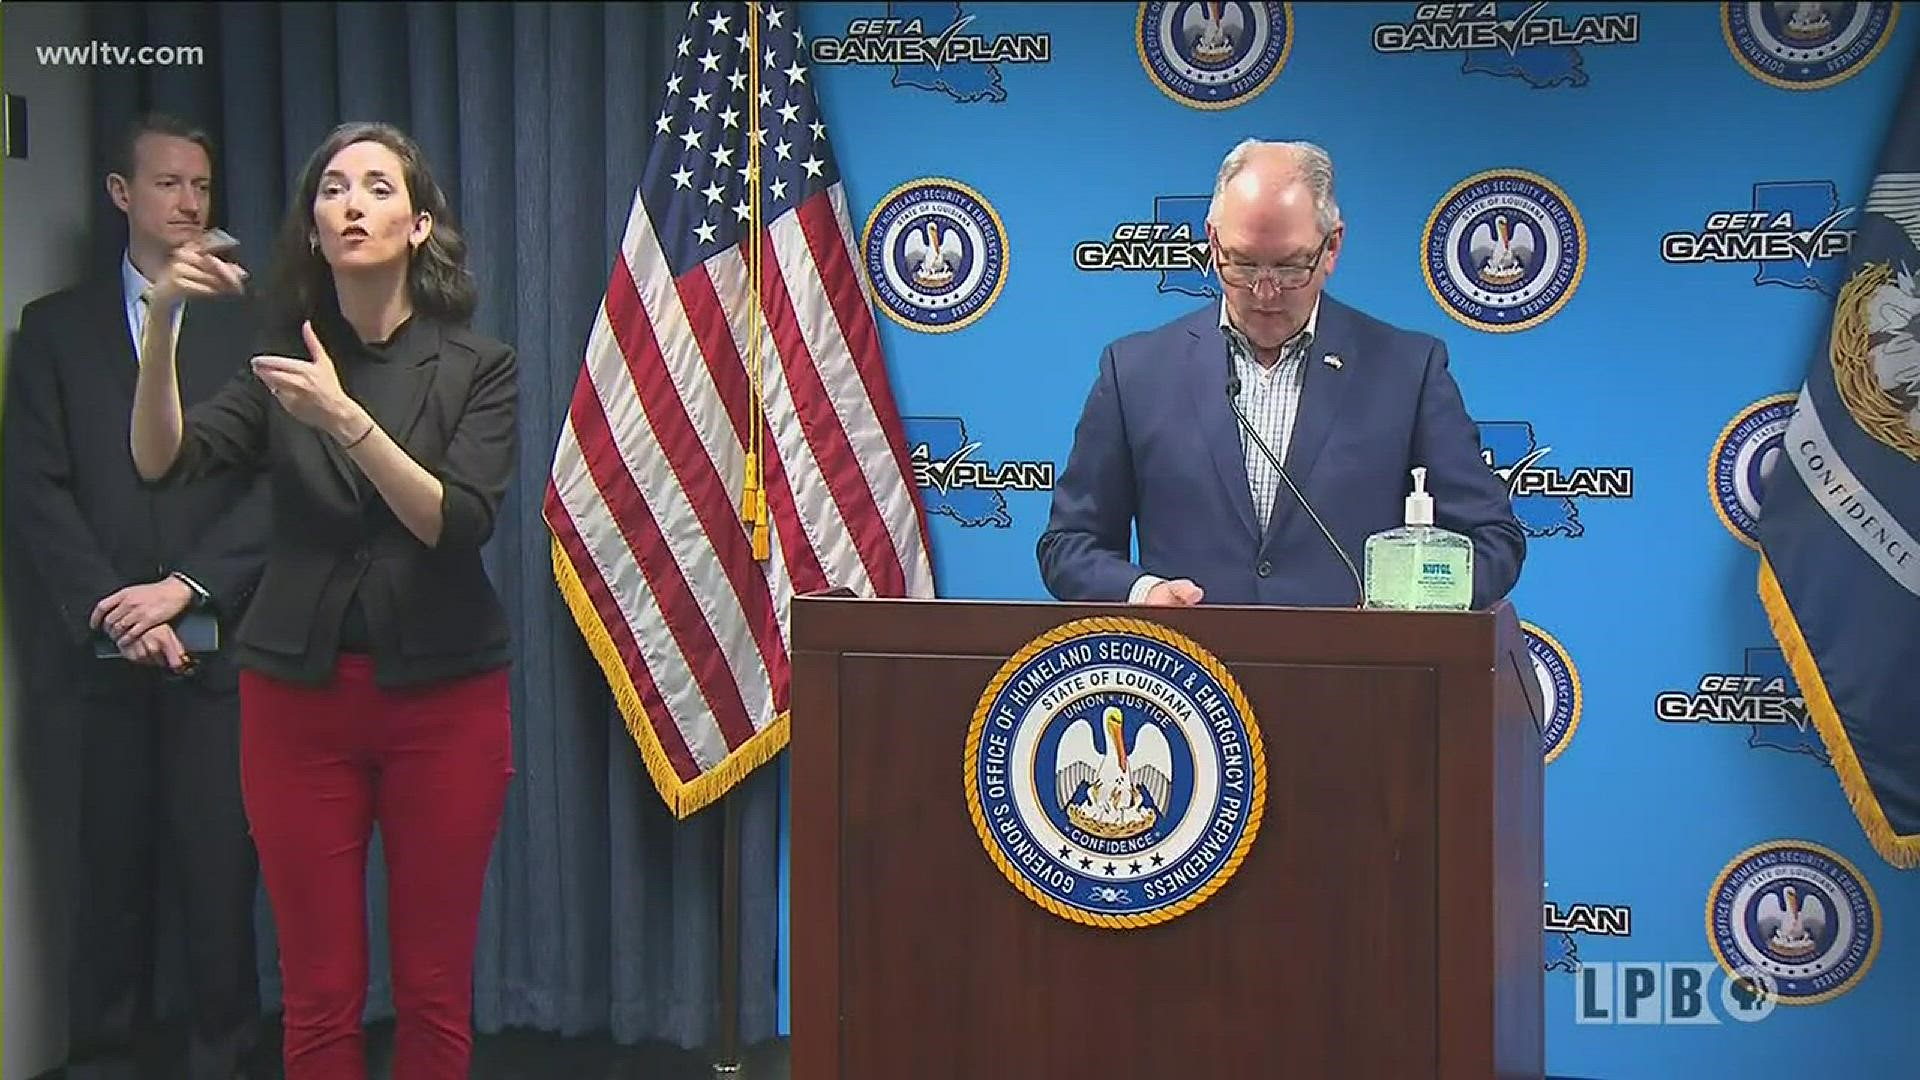 Governor John Bel Edwards of Louisiana provides his Thursday update on the coronavirus outbreak in the state - now past 2,300 cases and 83 deaths.